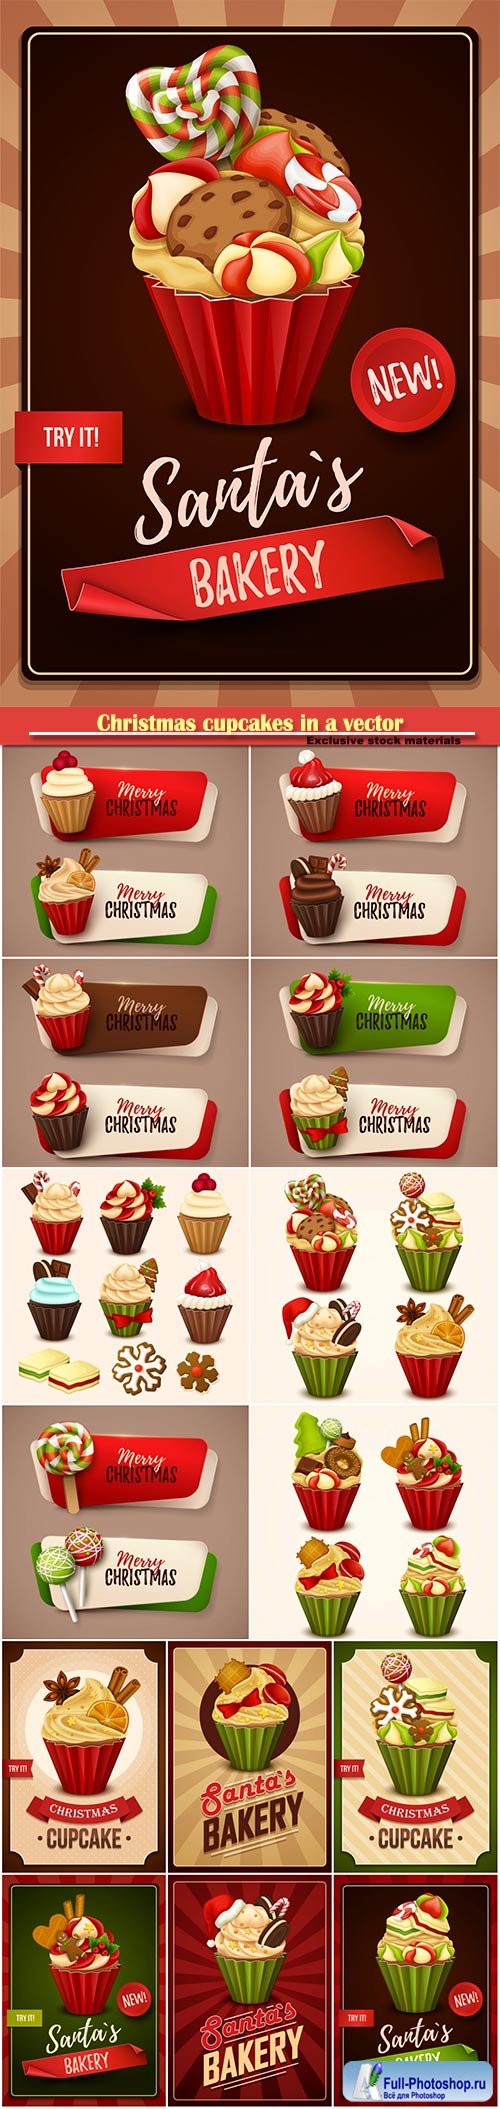 Christmas cupcakes in a vector, delicious sweets